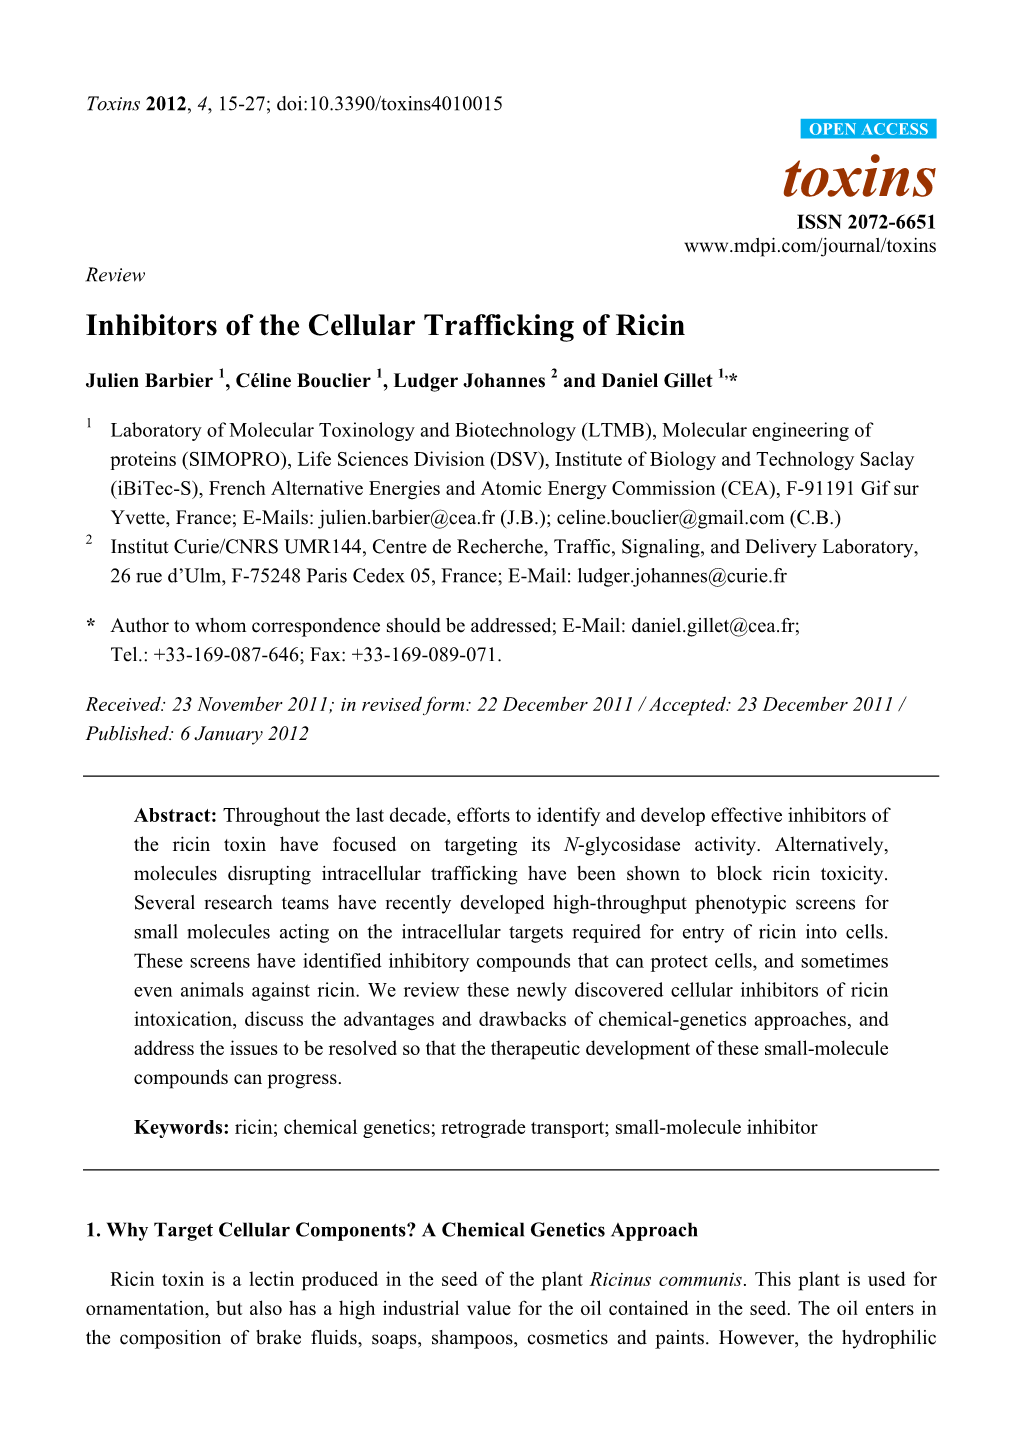 Inhibitors of the Cellular Trafficking of Ricin